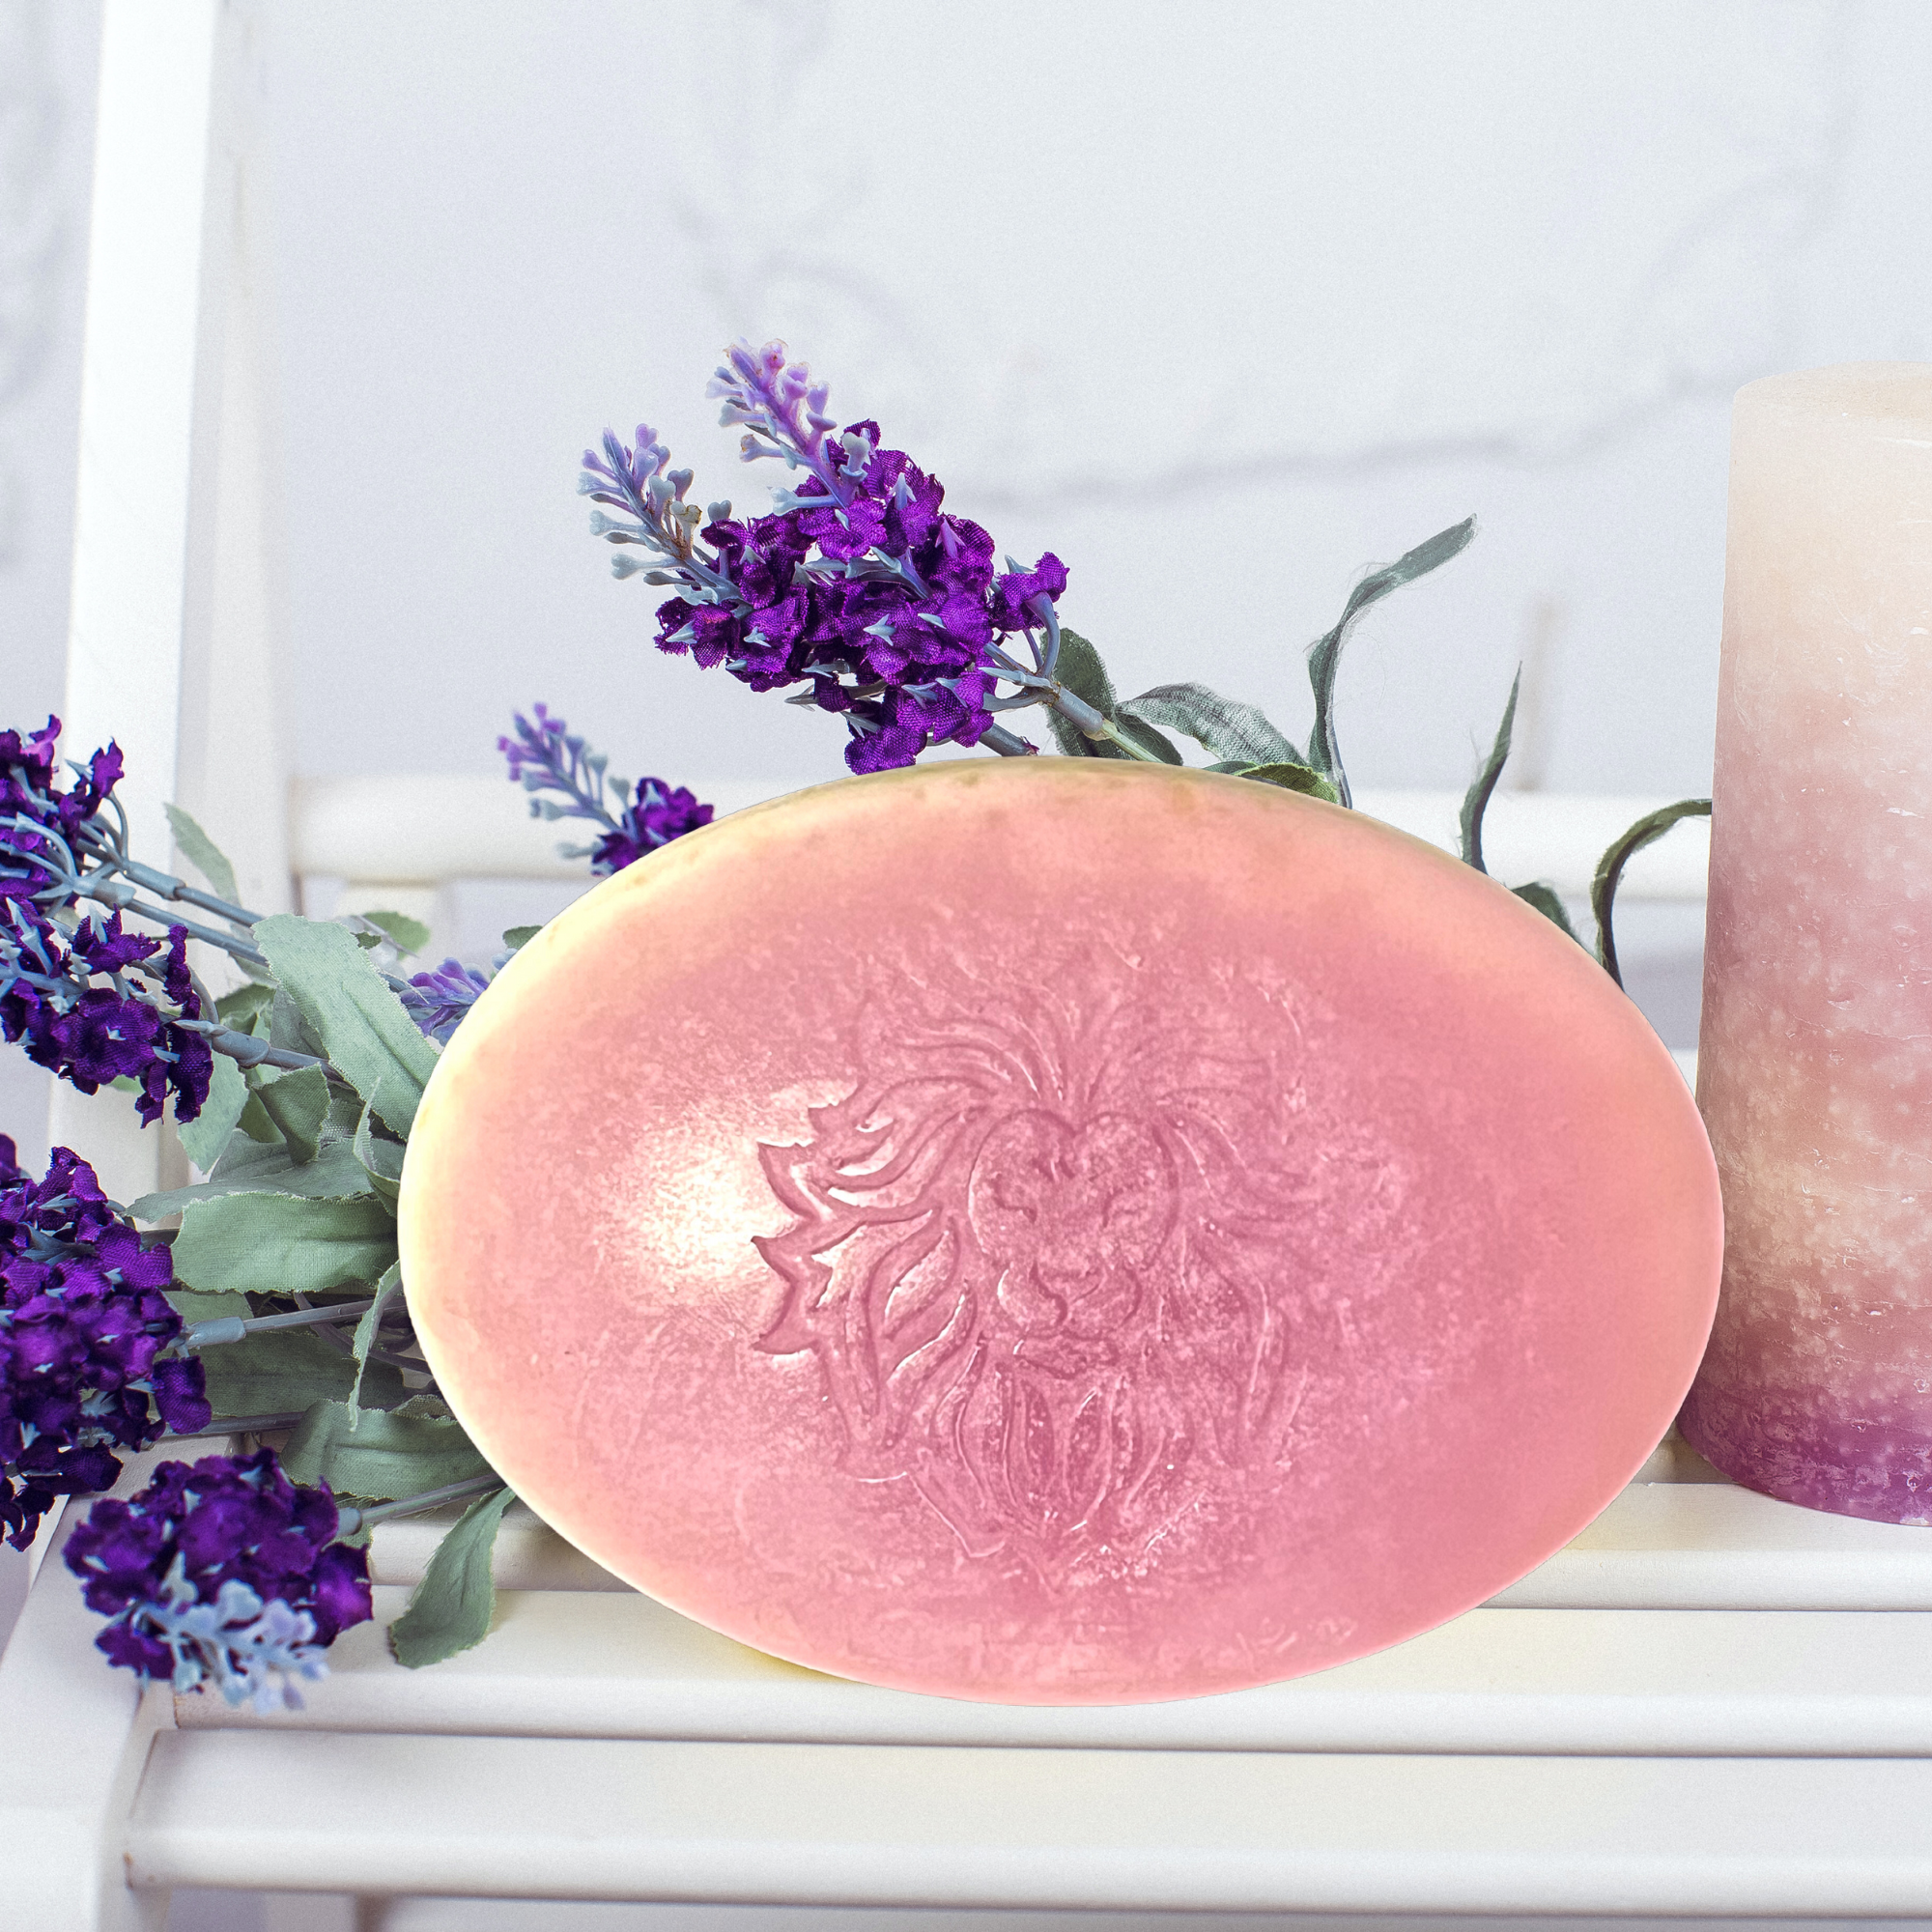 Alchemy7 | Lavender Field Soap— Oatmeal Shea Butter Soap with Aloe Vera To Promote Sleep and Relaxation